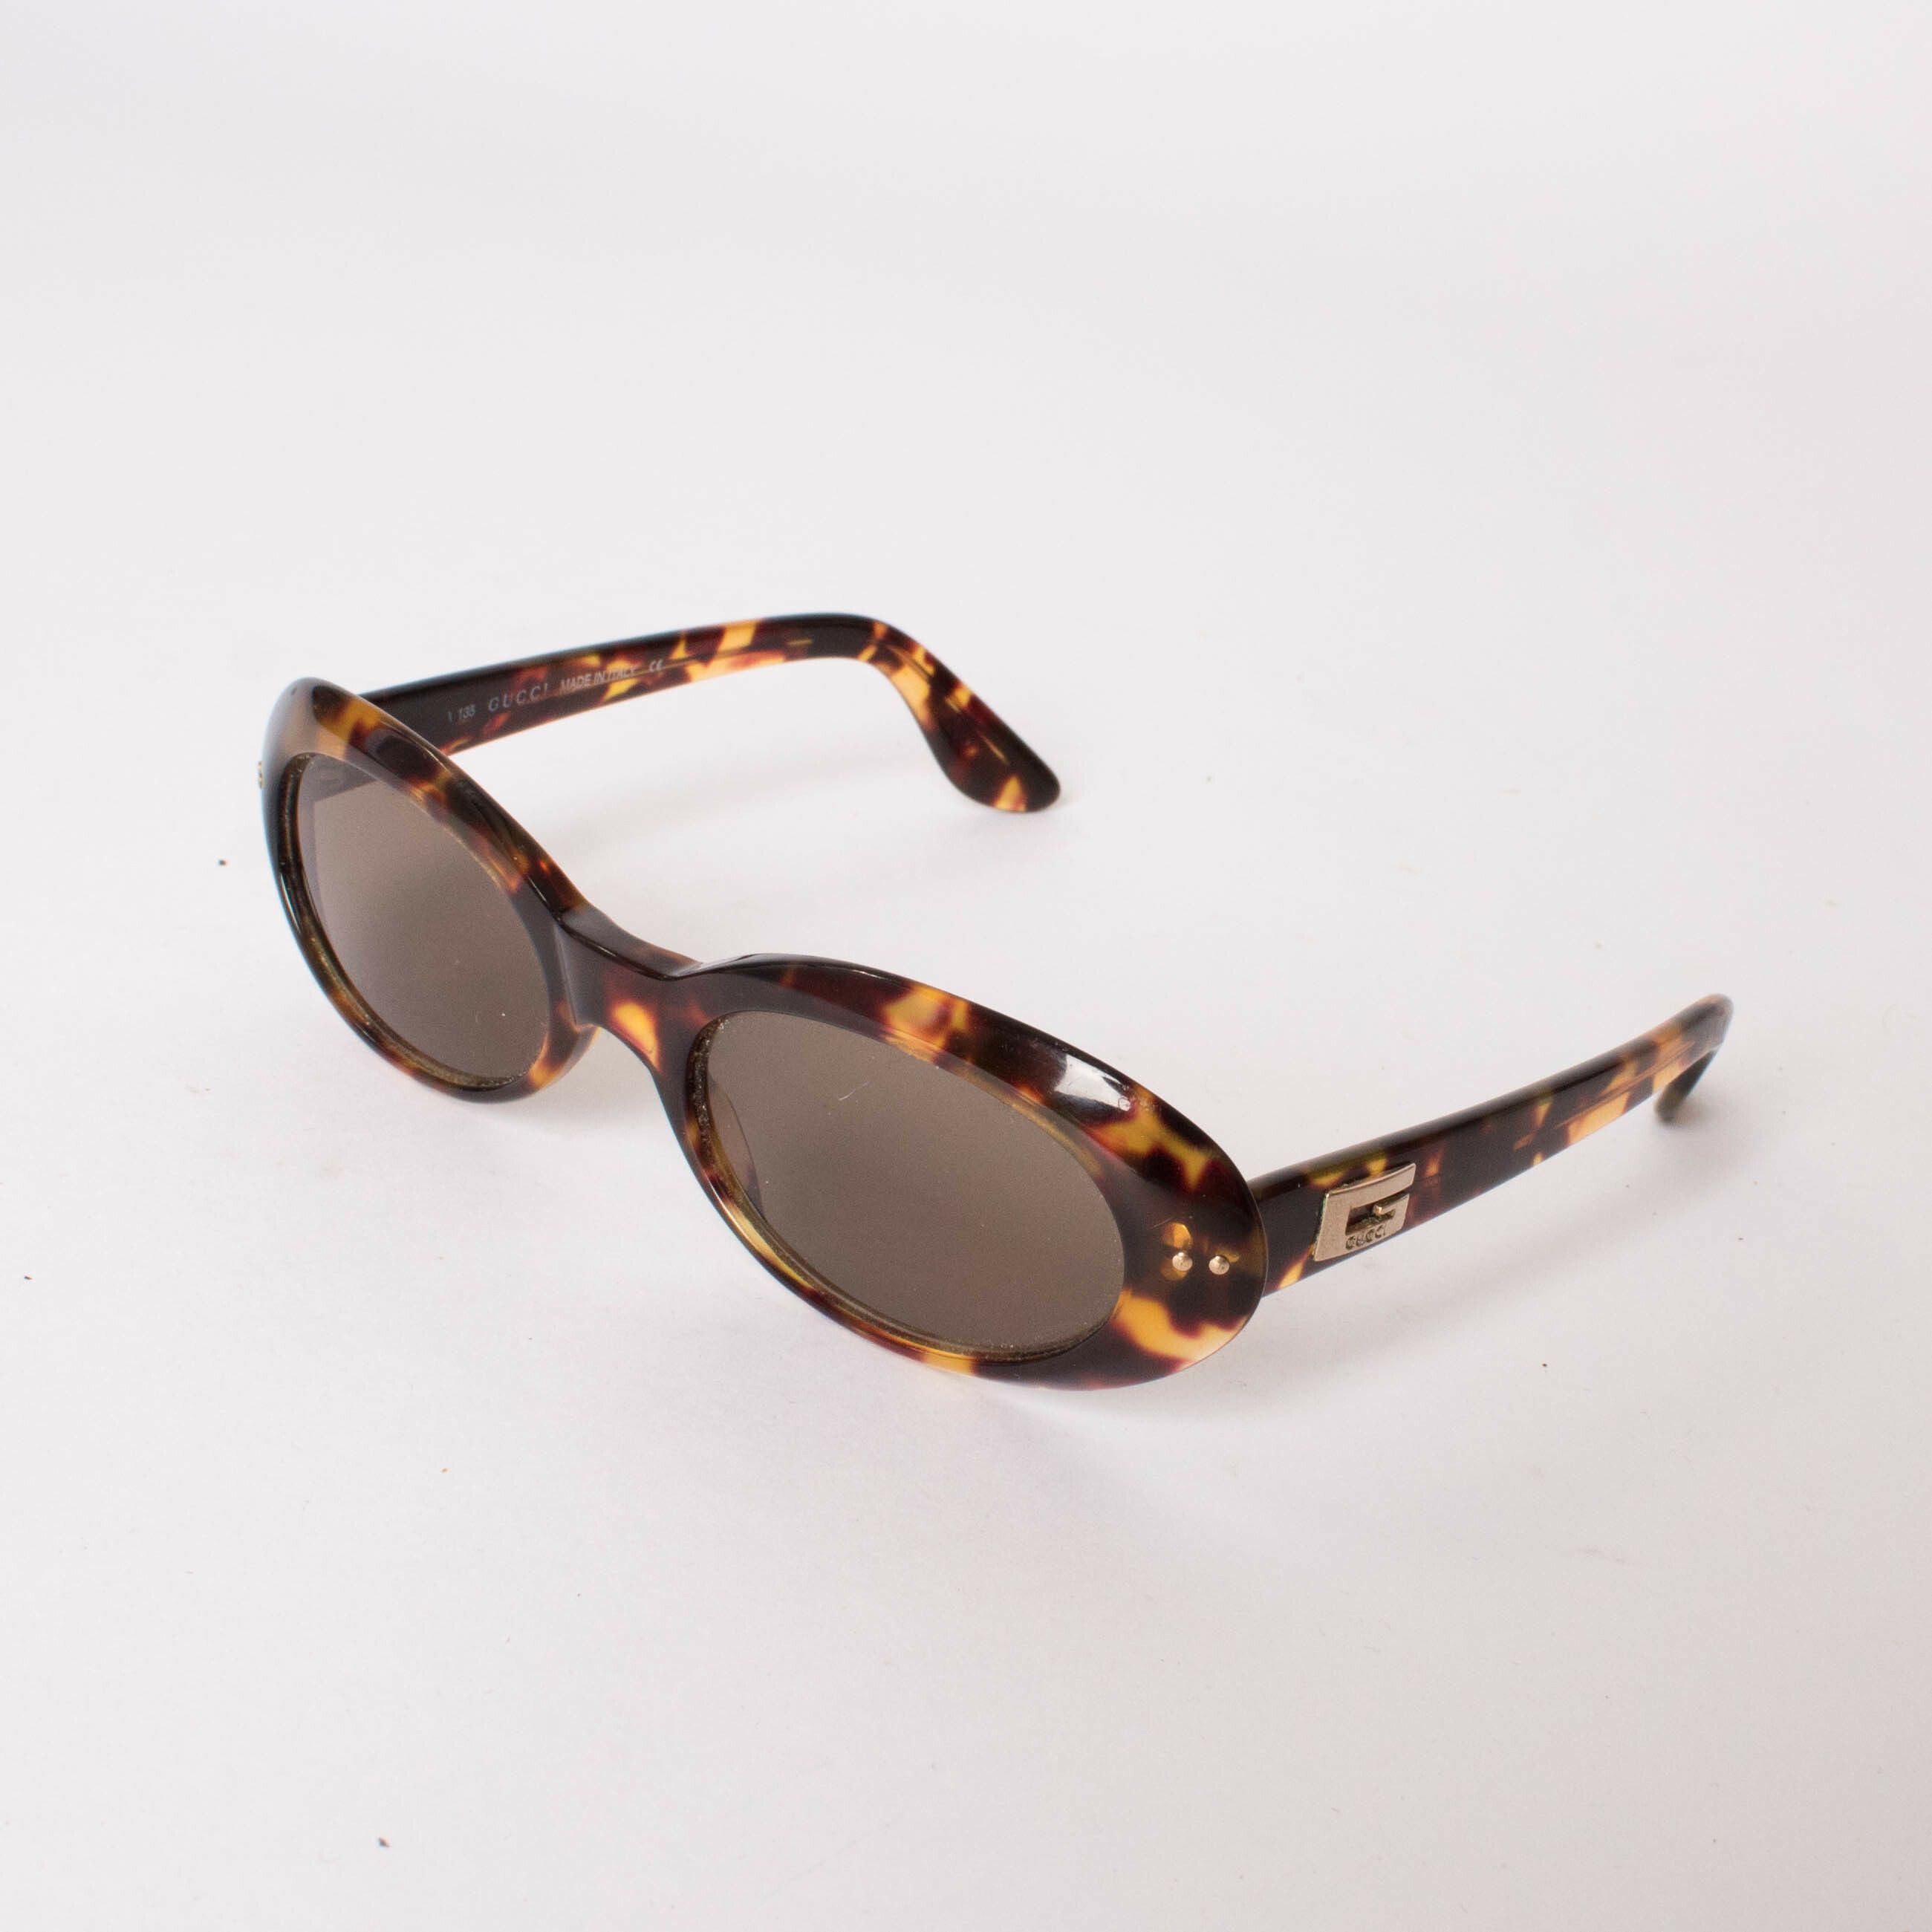 Gucci Vintage 90s Tortoise Shell Oval Sunglasses by Jess Hannah